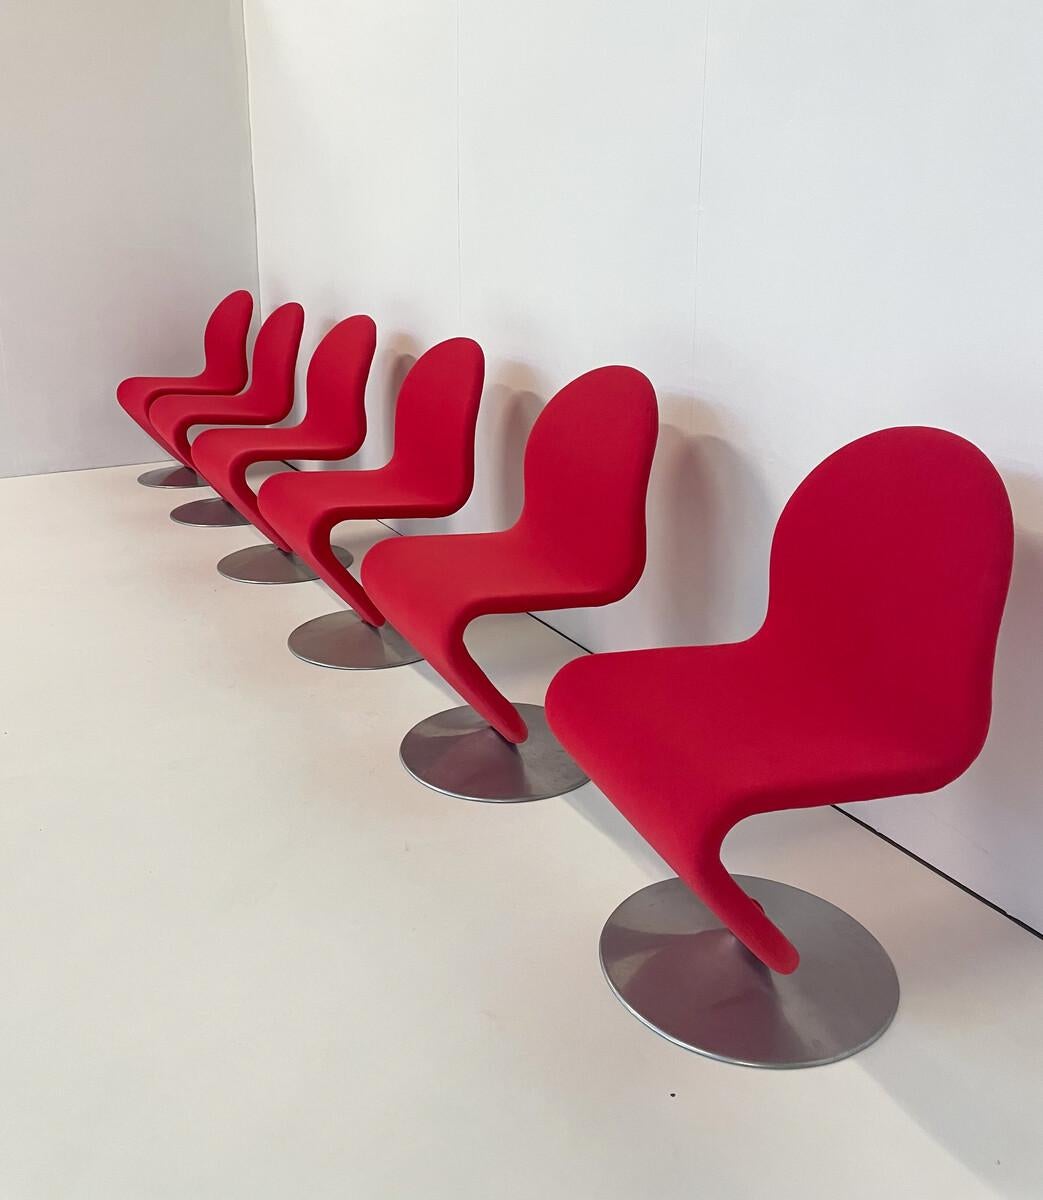 Danish Mid-Century Modern Set of 6 Red System 123 Chairs by Verner Panton, 1973 For Sale